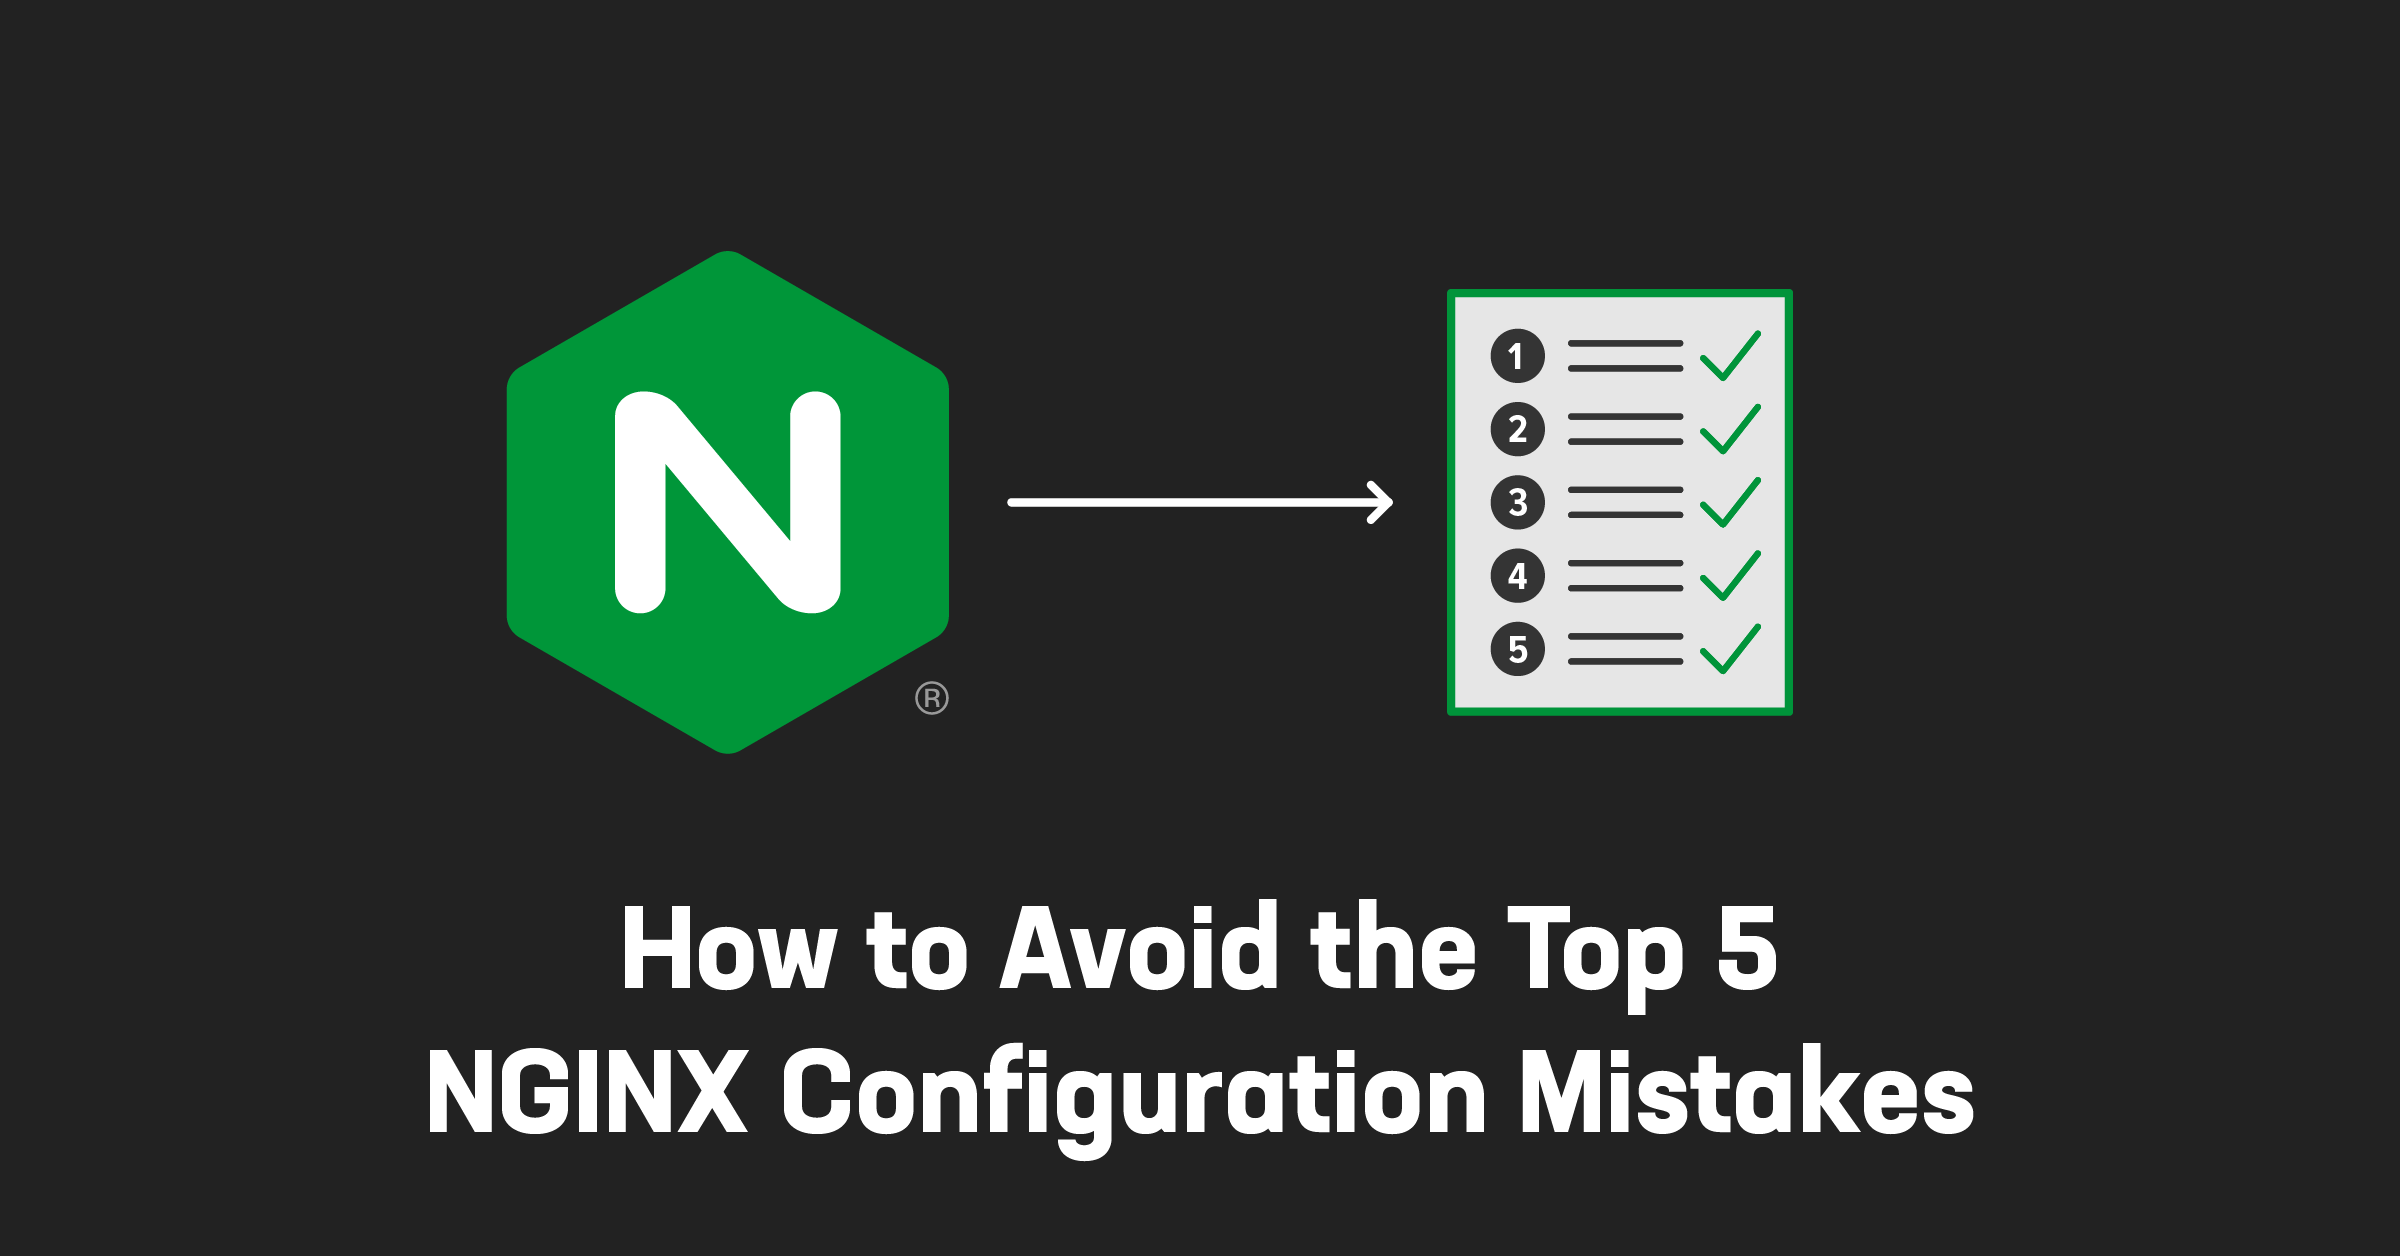 Arrow pointing from NGINX icon to document with checklist